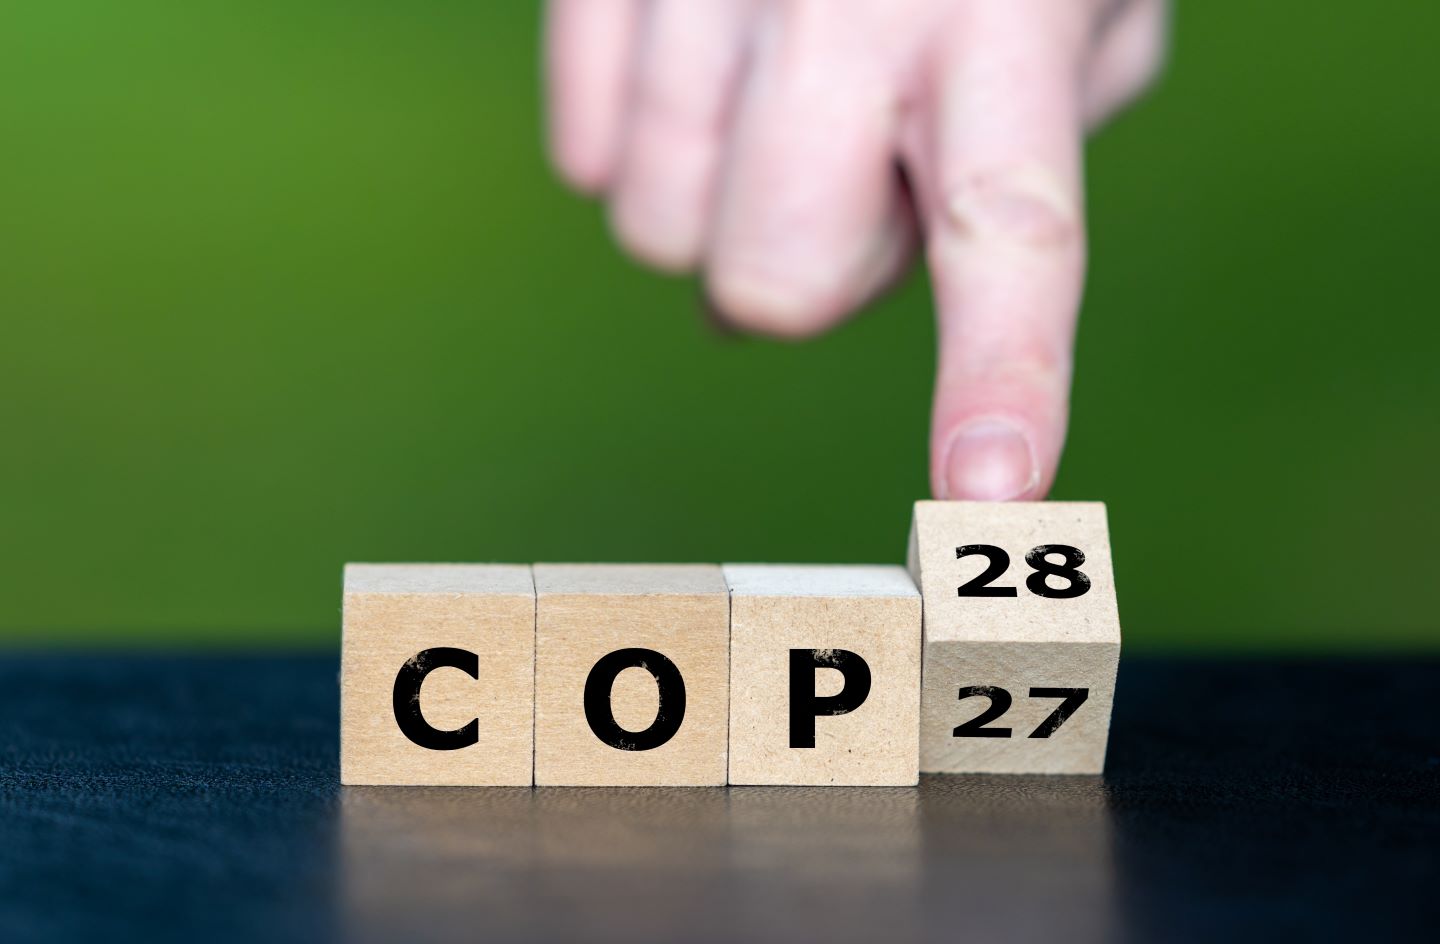 COP28: Fashion's failure to engage suppliers hinders 1.5°C target